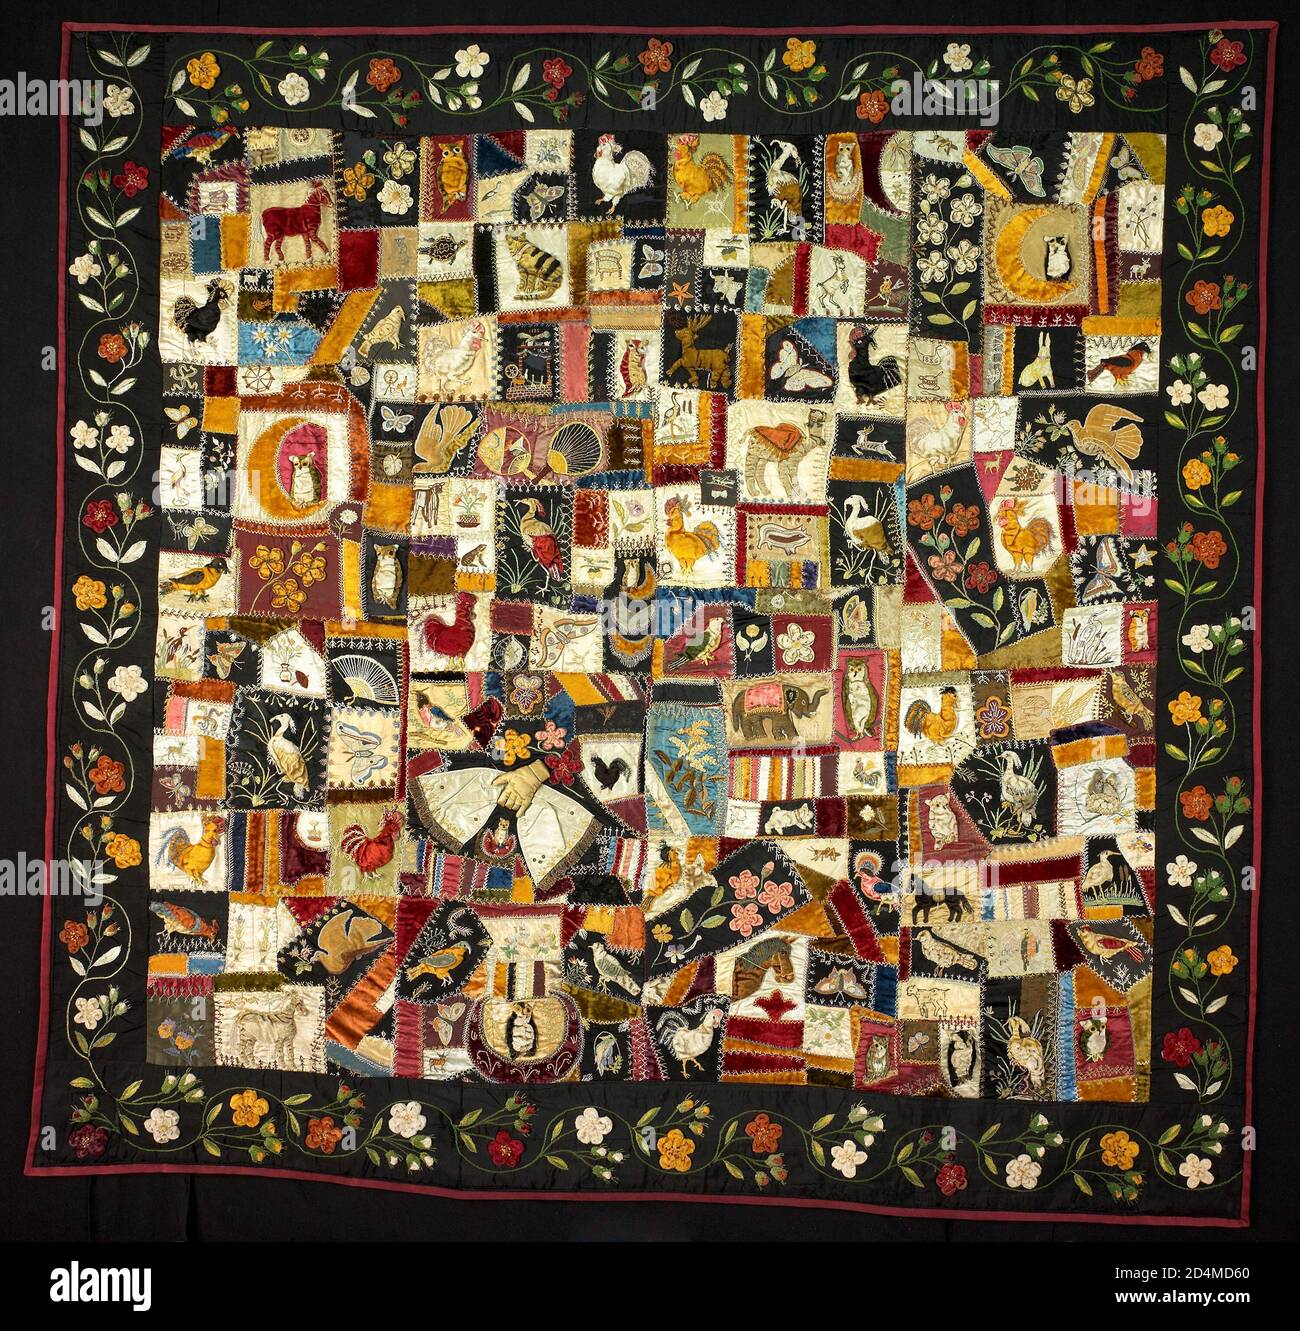 Pieced and embroidered â€œcrazyâ€ quilt; dyed and printed silk; cotton; wool and metallic plain; twill; satin; velvet and patterned weave fabrics and ribbons; silk; cotton and metallic embroidery threads; raised work embroidered appliques; glass beads; metal spangles Stock Photo